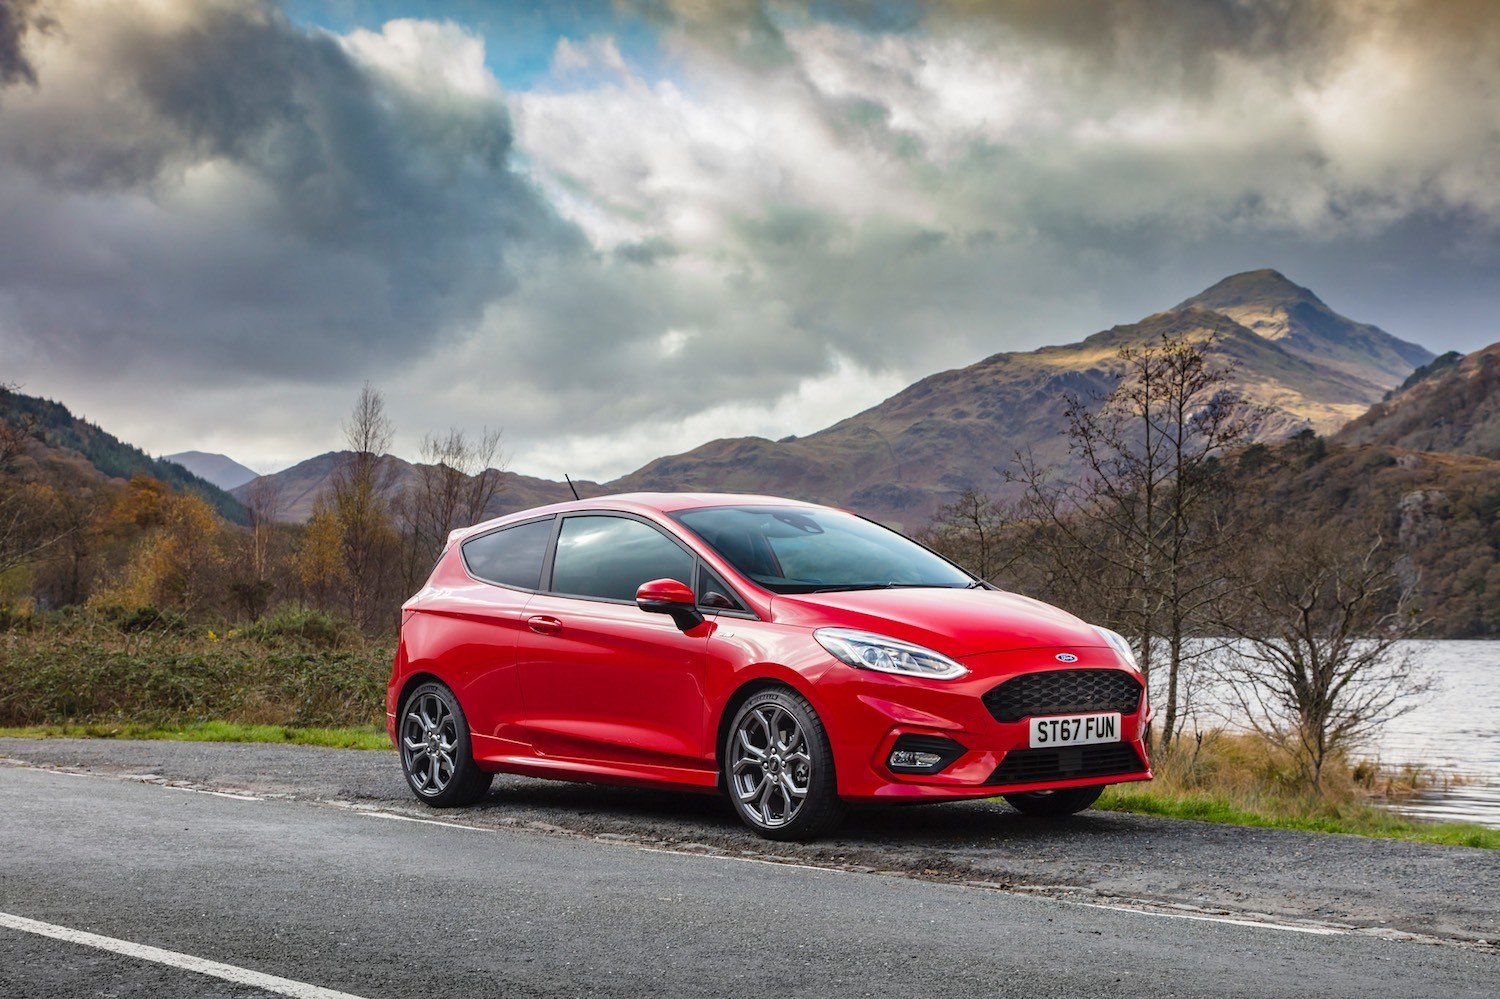 Neil Lyndon drives the All-New Ford Fiesta ST-Line 4